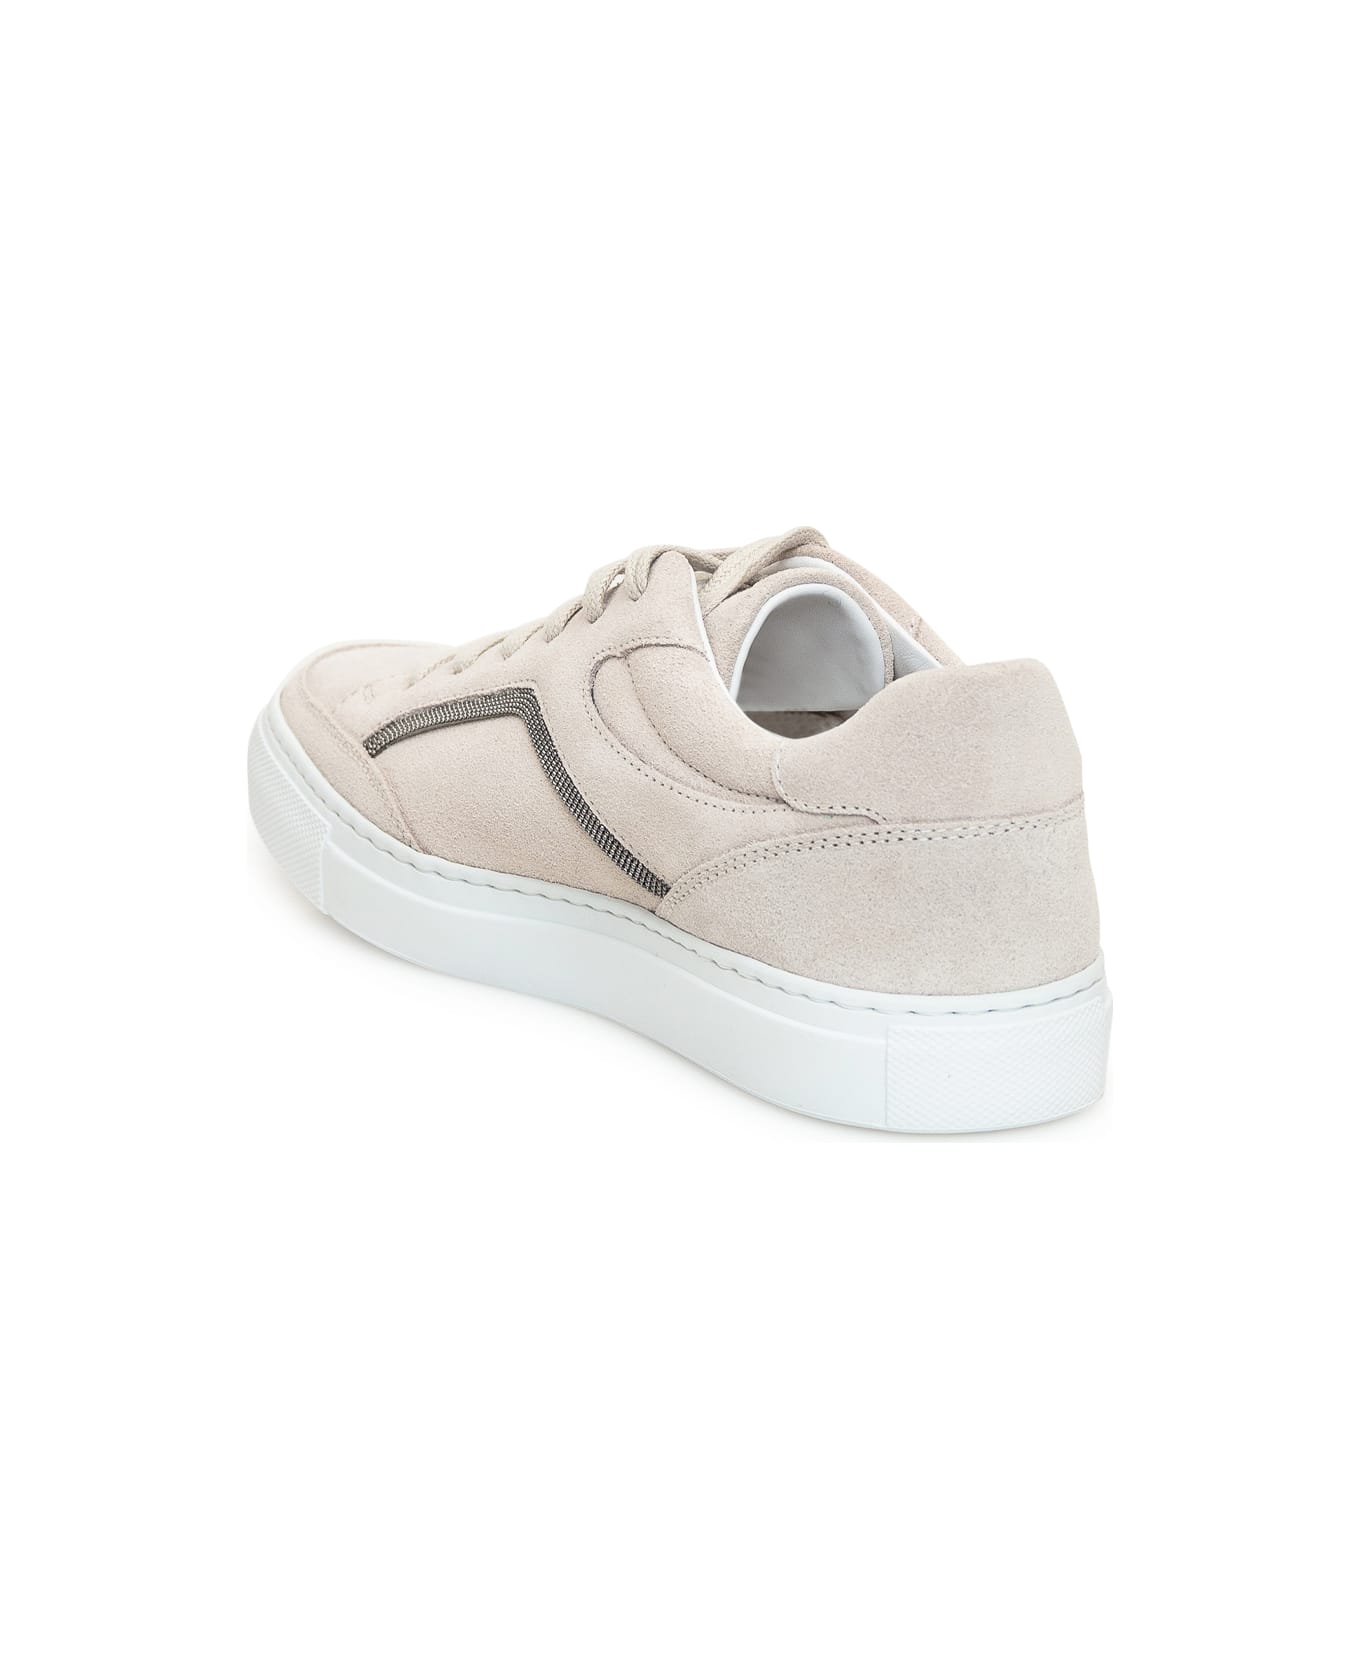 Brunello Cucinelli Suede Shoe Embellished With Threads Of Brilliant Monili On The Sides And Closure With Laces - Beige